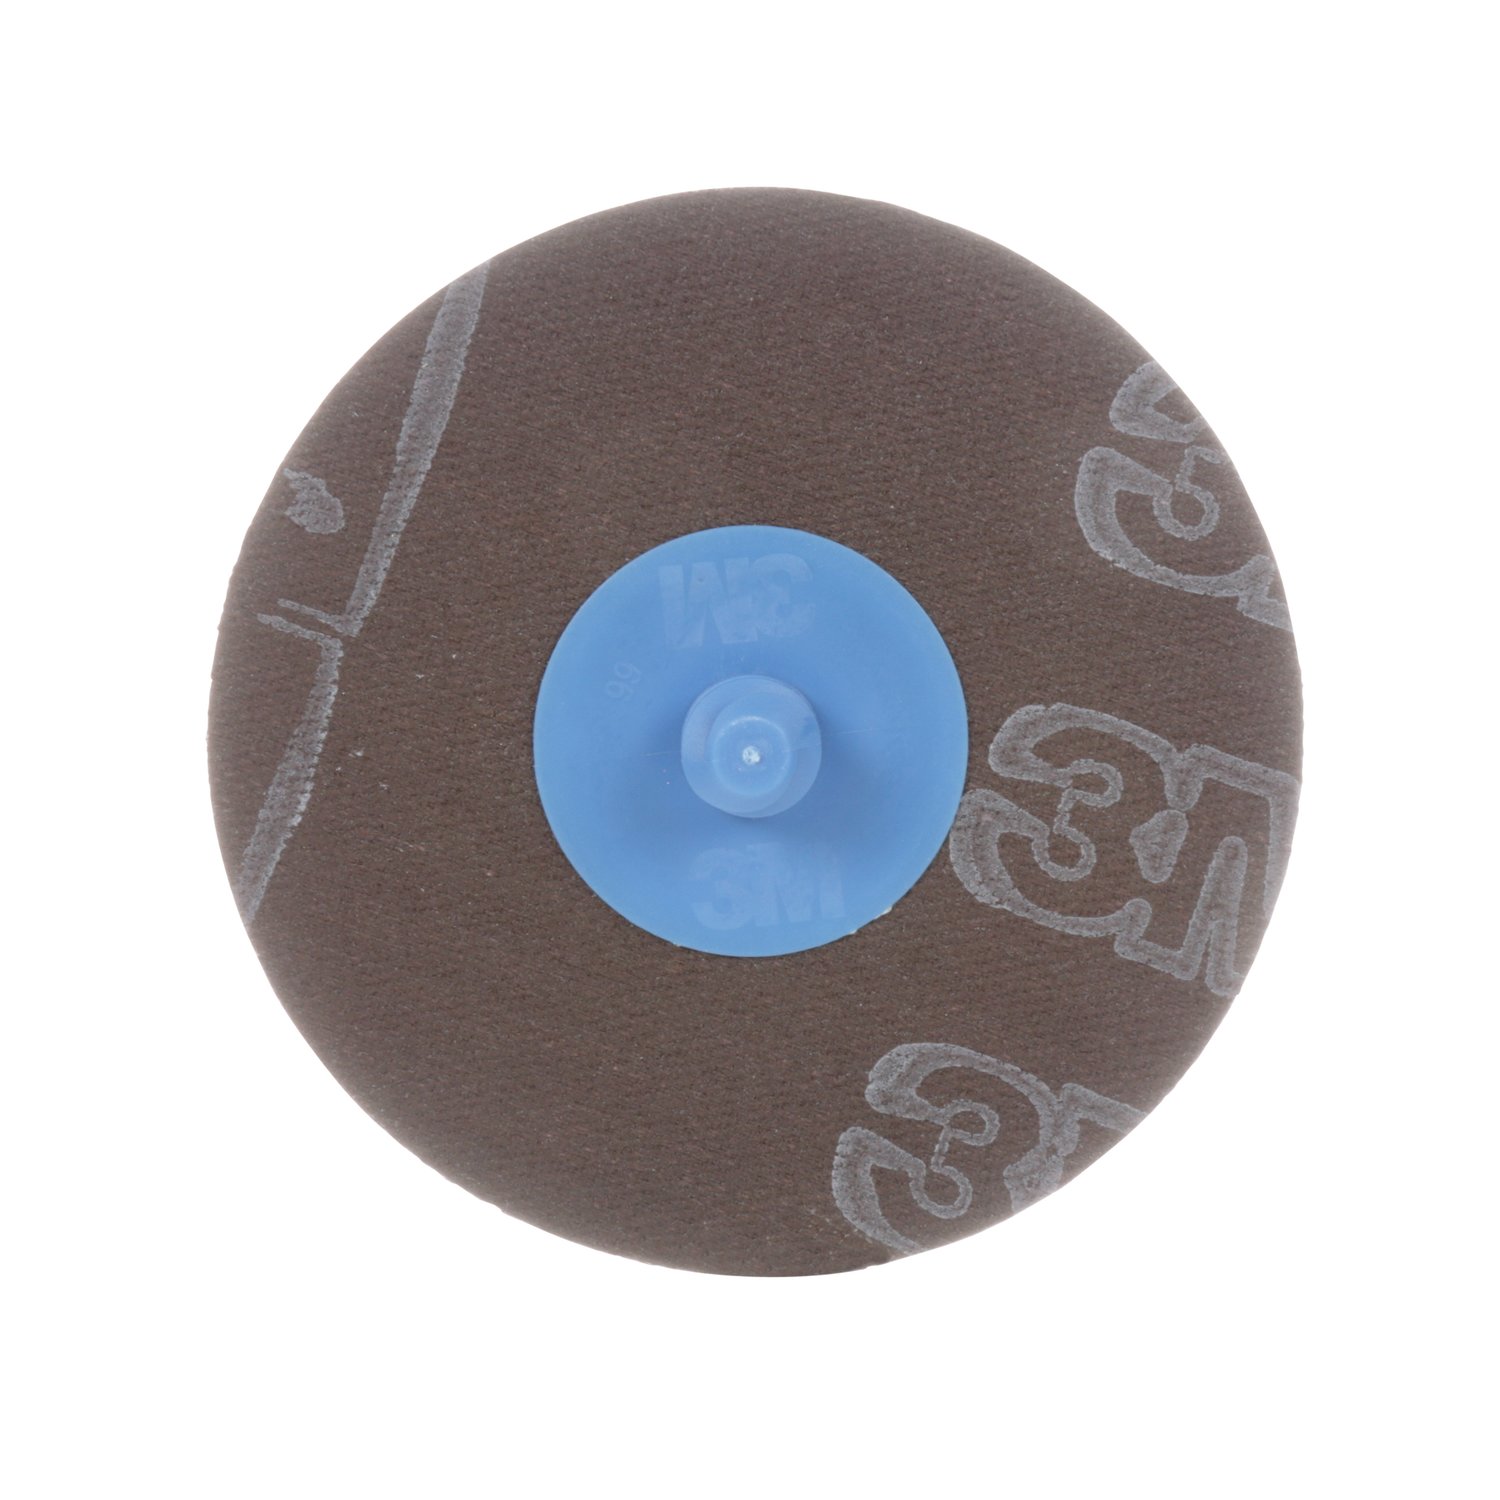 7010532546 - 3M Trizact Roloc Cloth Disc 237AA, A160 X-weight, TR, 1-1/2 in, Die
R150S